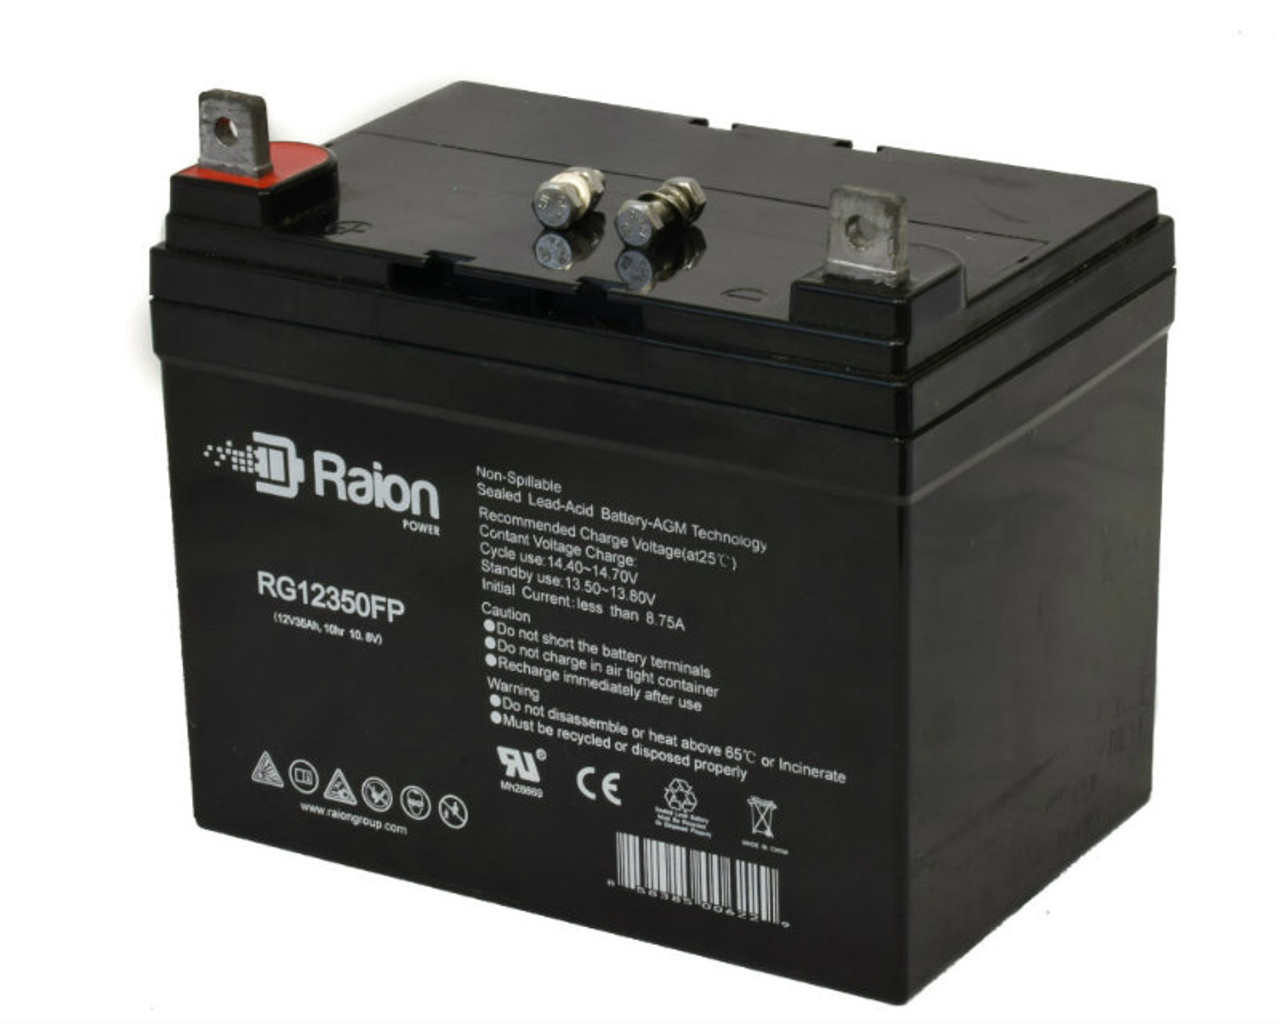 Raion Power Replacement 12V 35Ah Battery for Troybilt 15 GEAR & HYDRO - 1 Pack